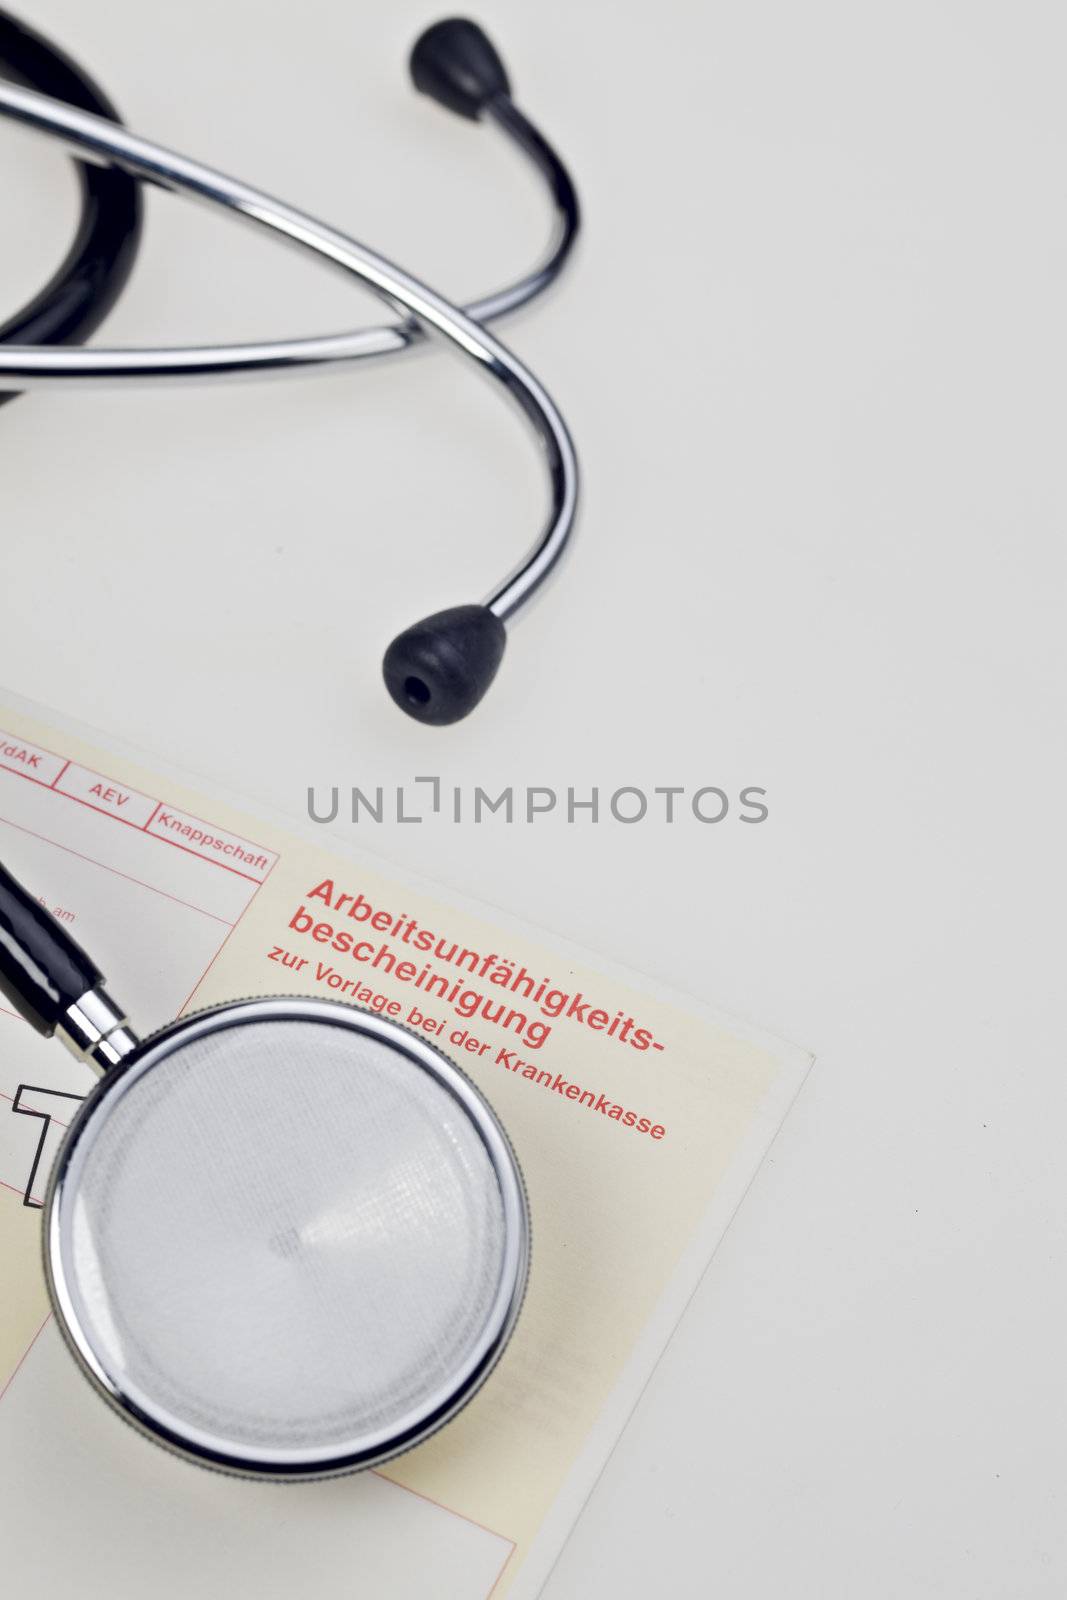 stethoscope and forms by bernjuer